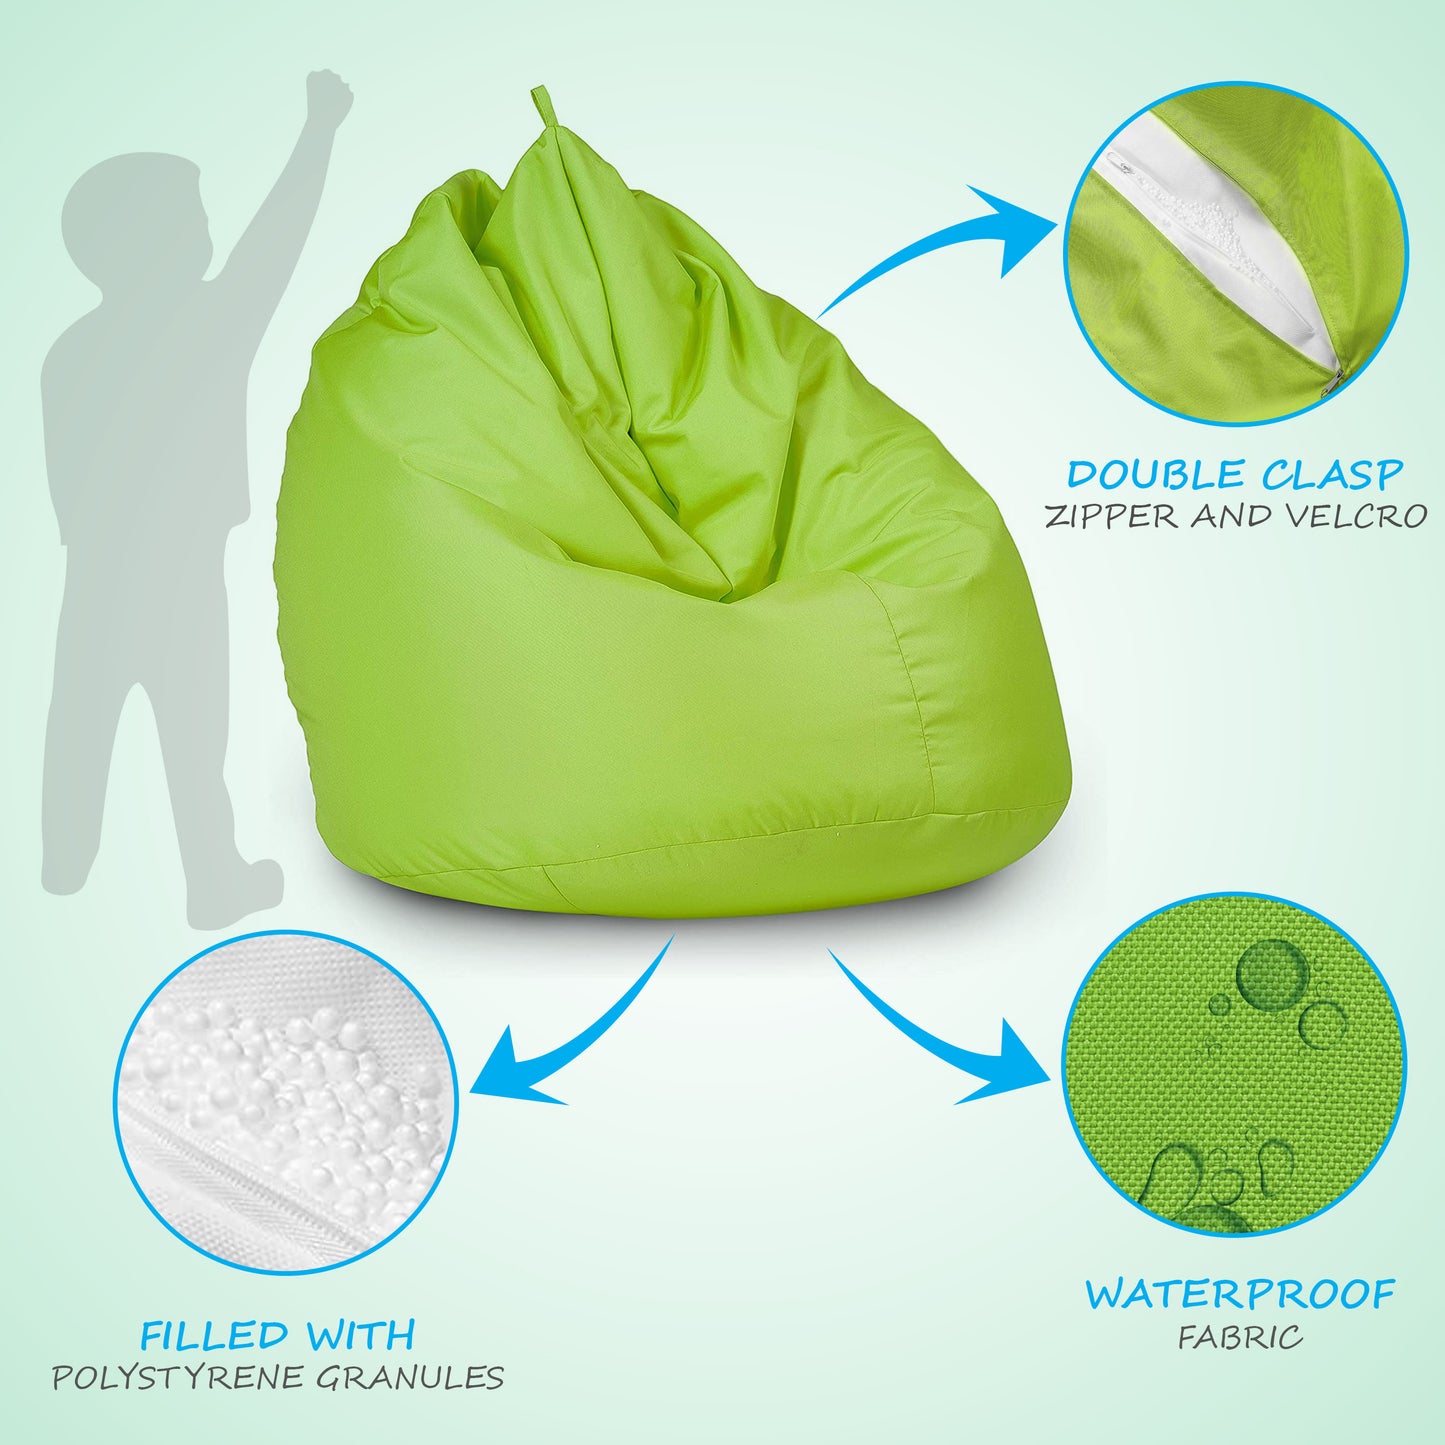 Chilly piley bean bag beanbag indoor outdoor for kids and adults many colors and sizes to choose from 